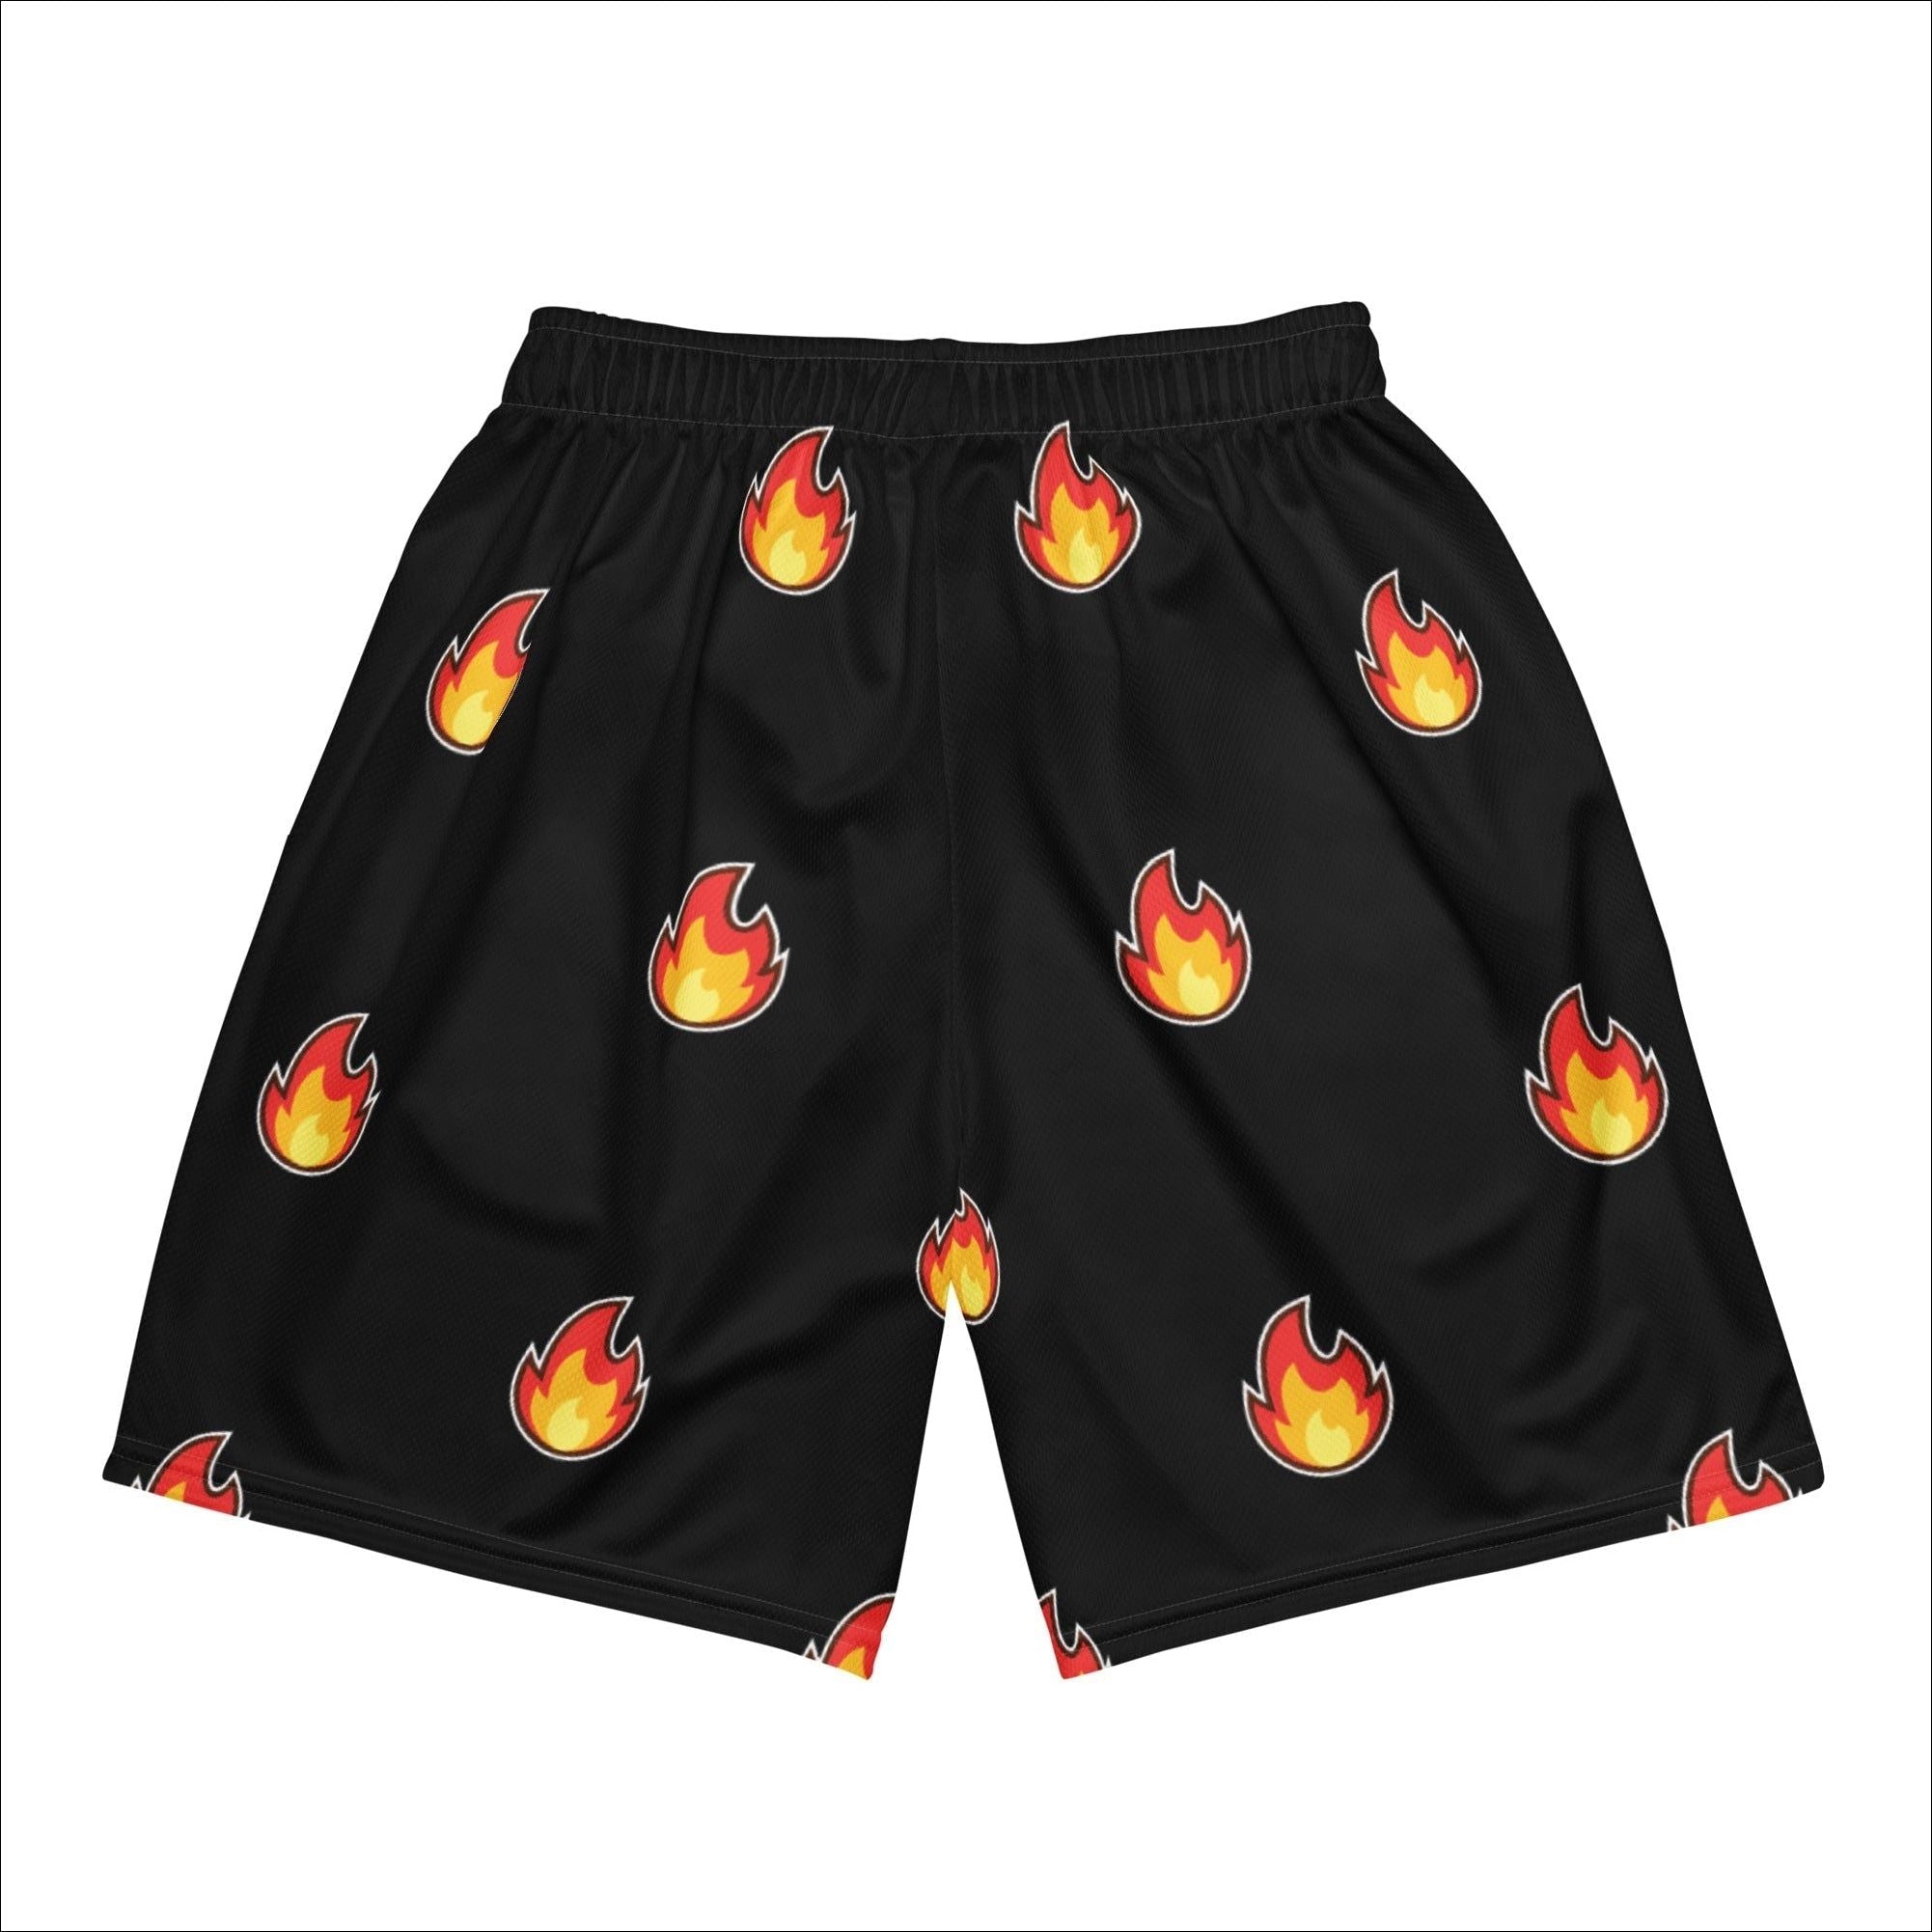 Fuel Your Fire Black Mesh Shorts - Bad Product